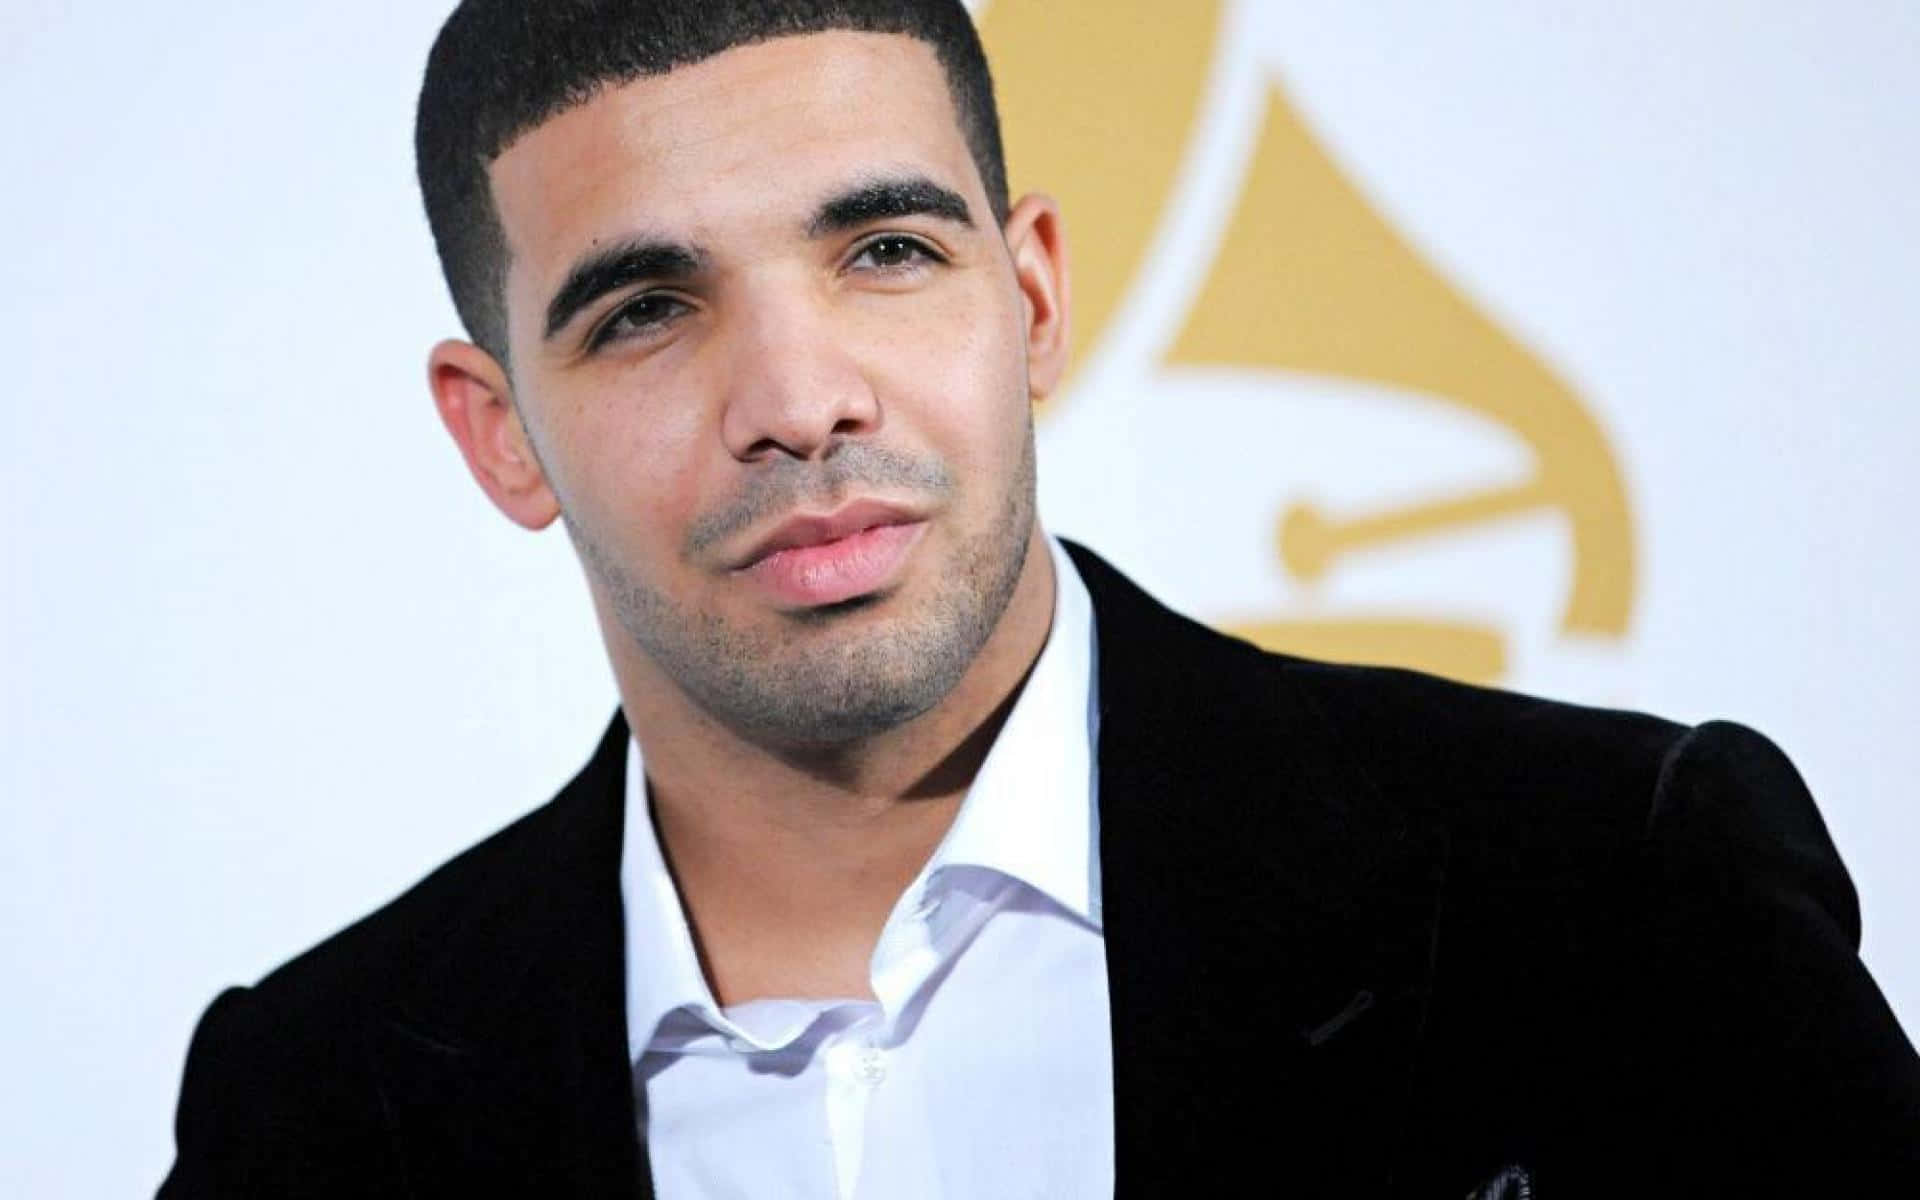 drake is posing for a photo at the grammy awards Wallpaper